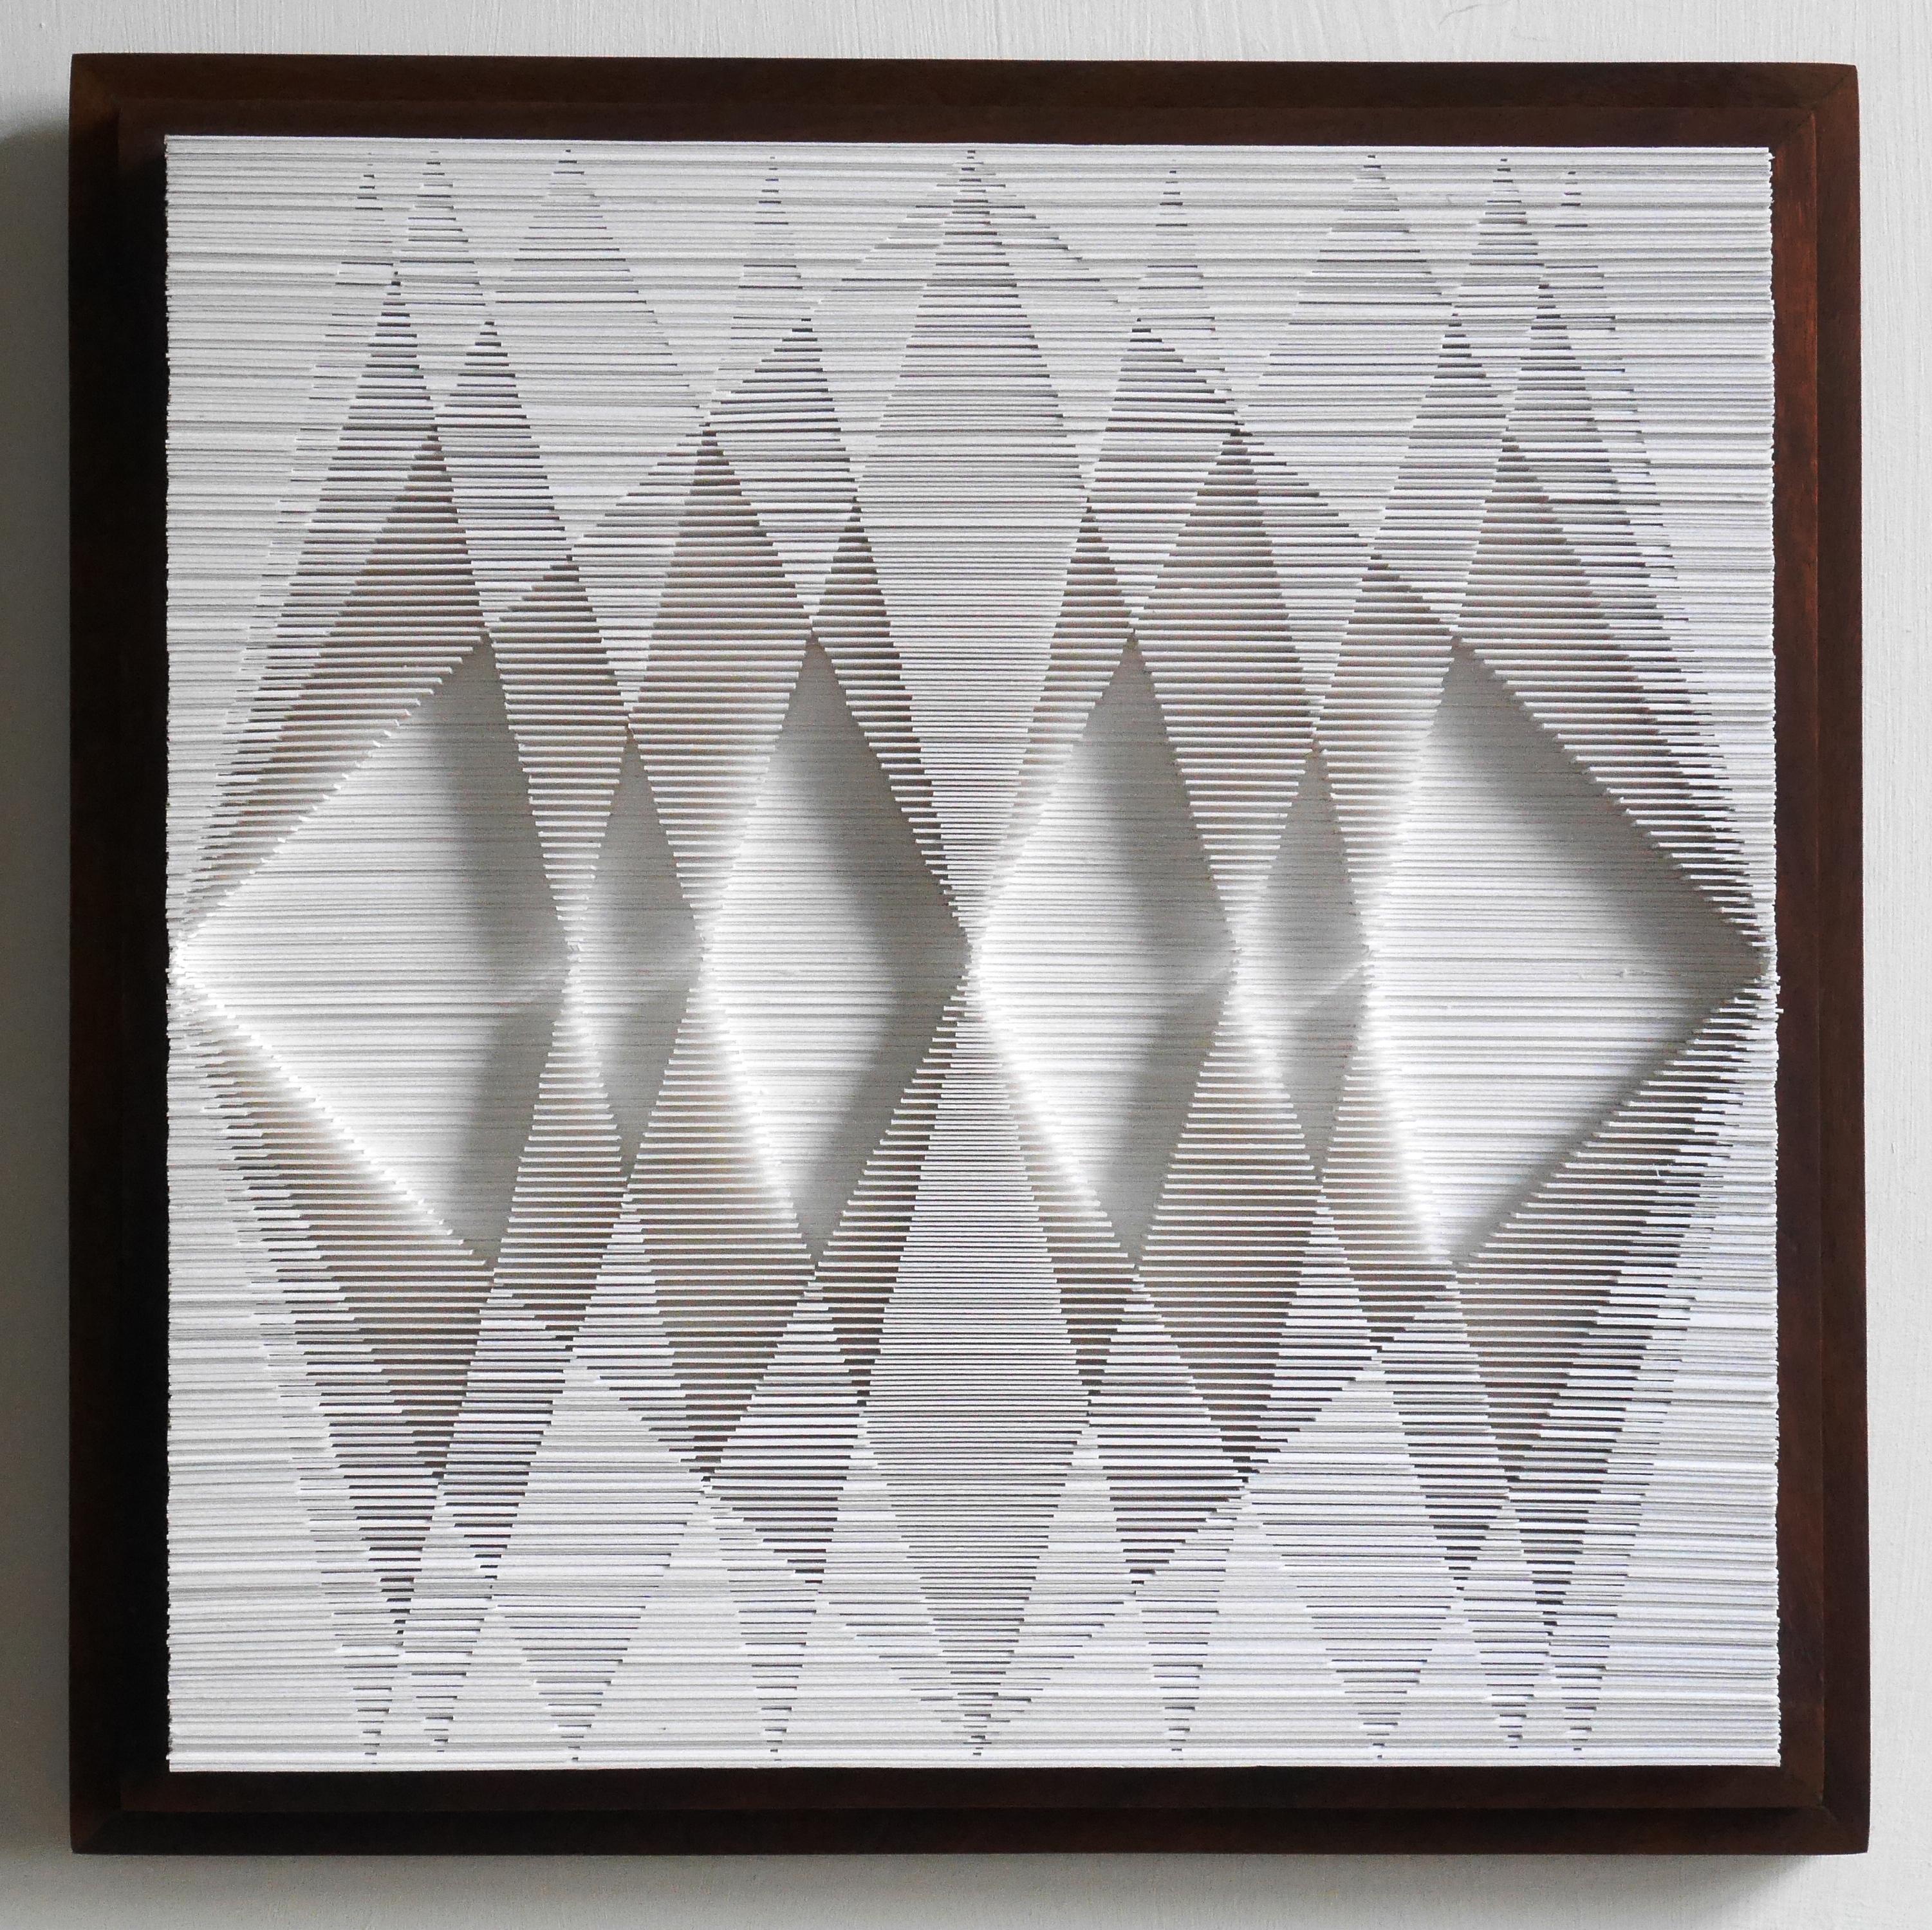 In this work, Sophie has taken the idea of stacked paper and turned it into a visual and contemplative experience.  Mounted in a wooden box frame, the cut edge of the paper forms a series of triangles that change shape as you move.  This piece is